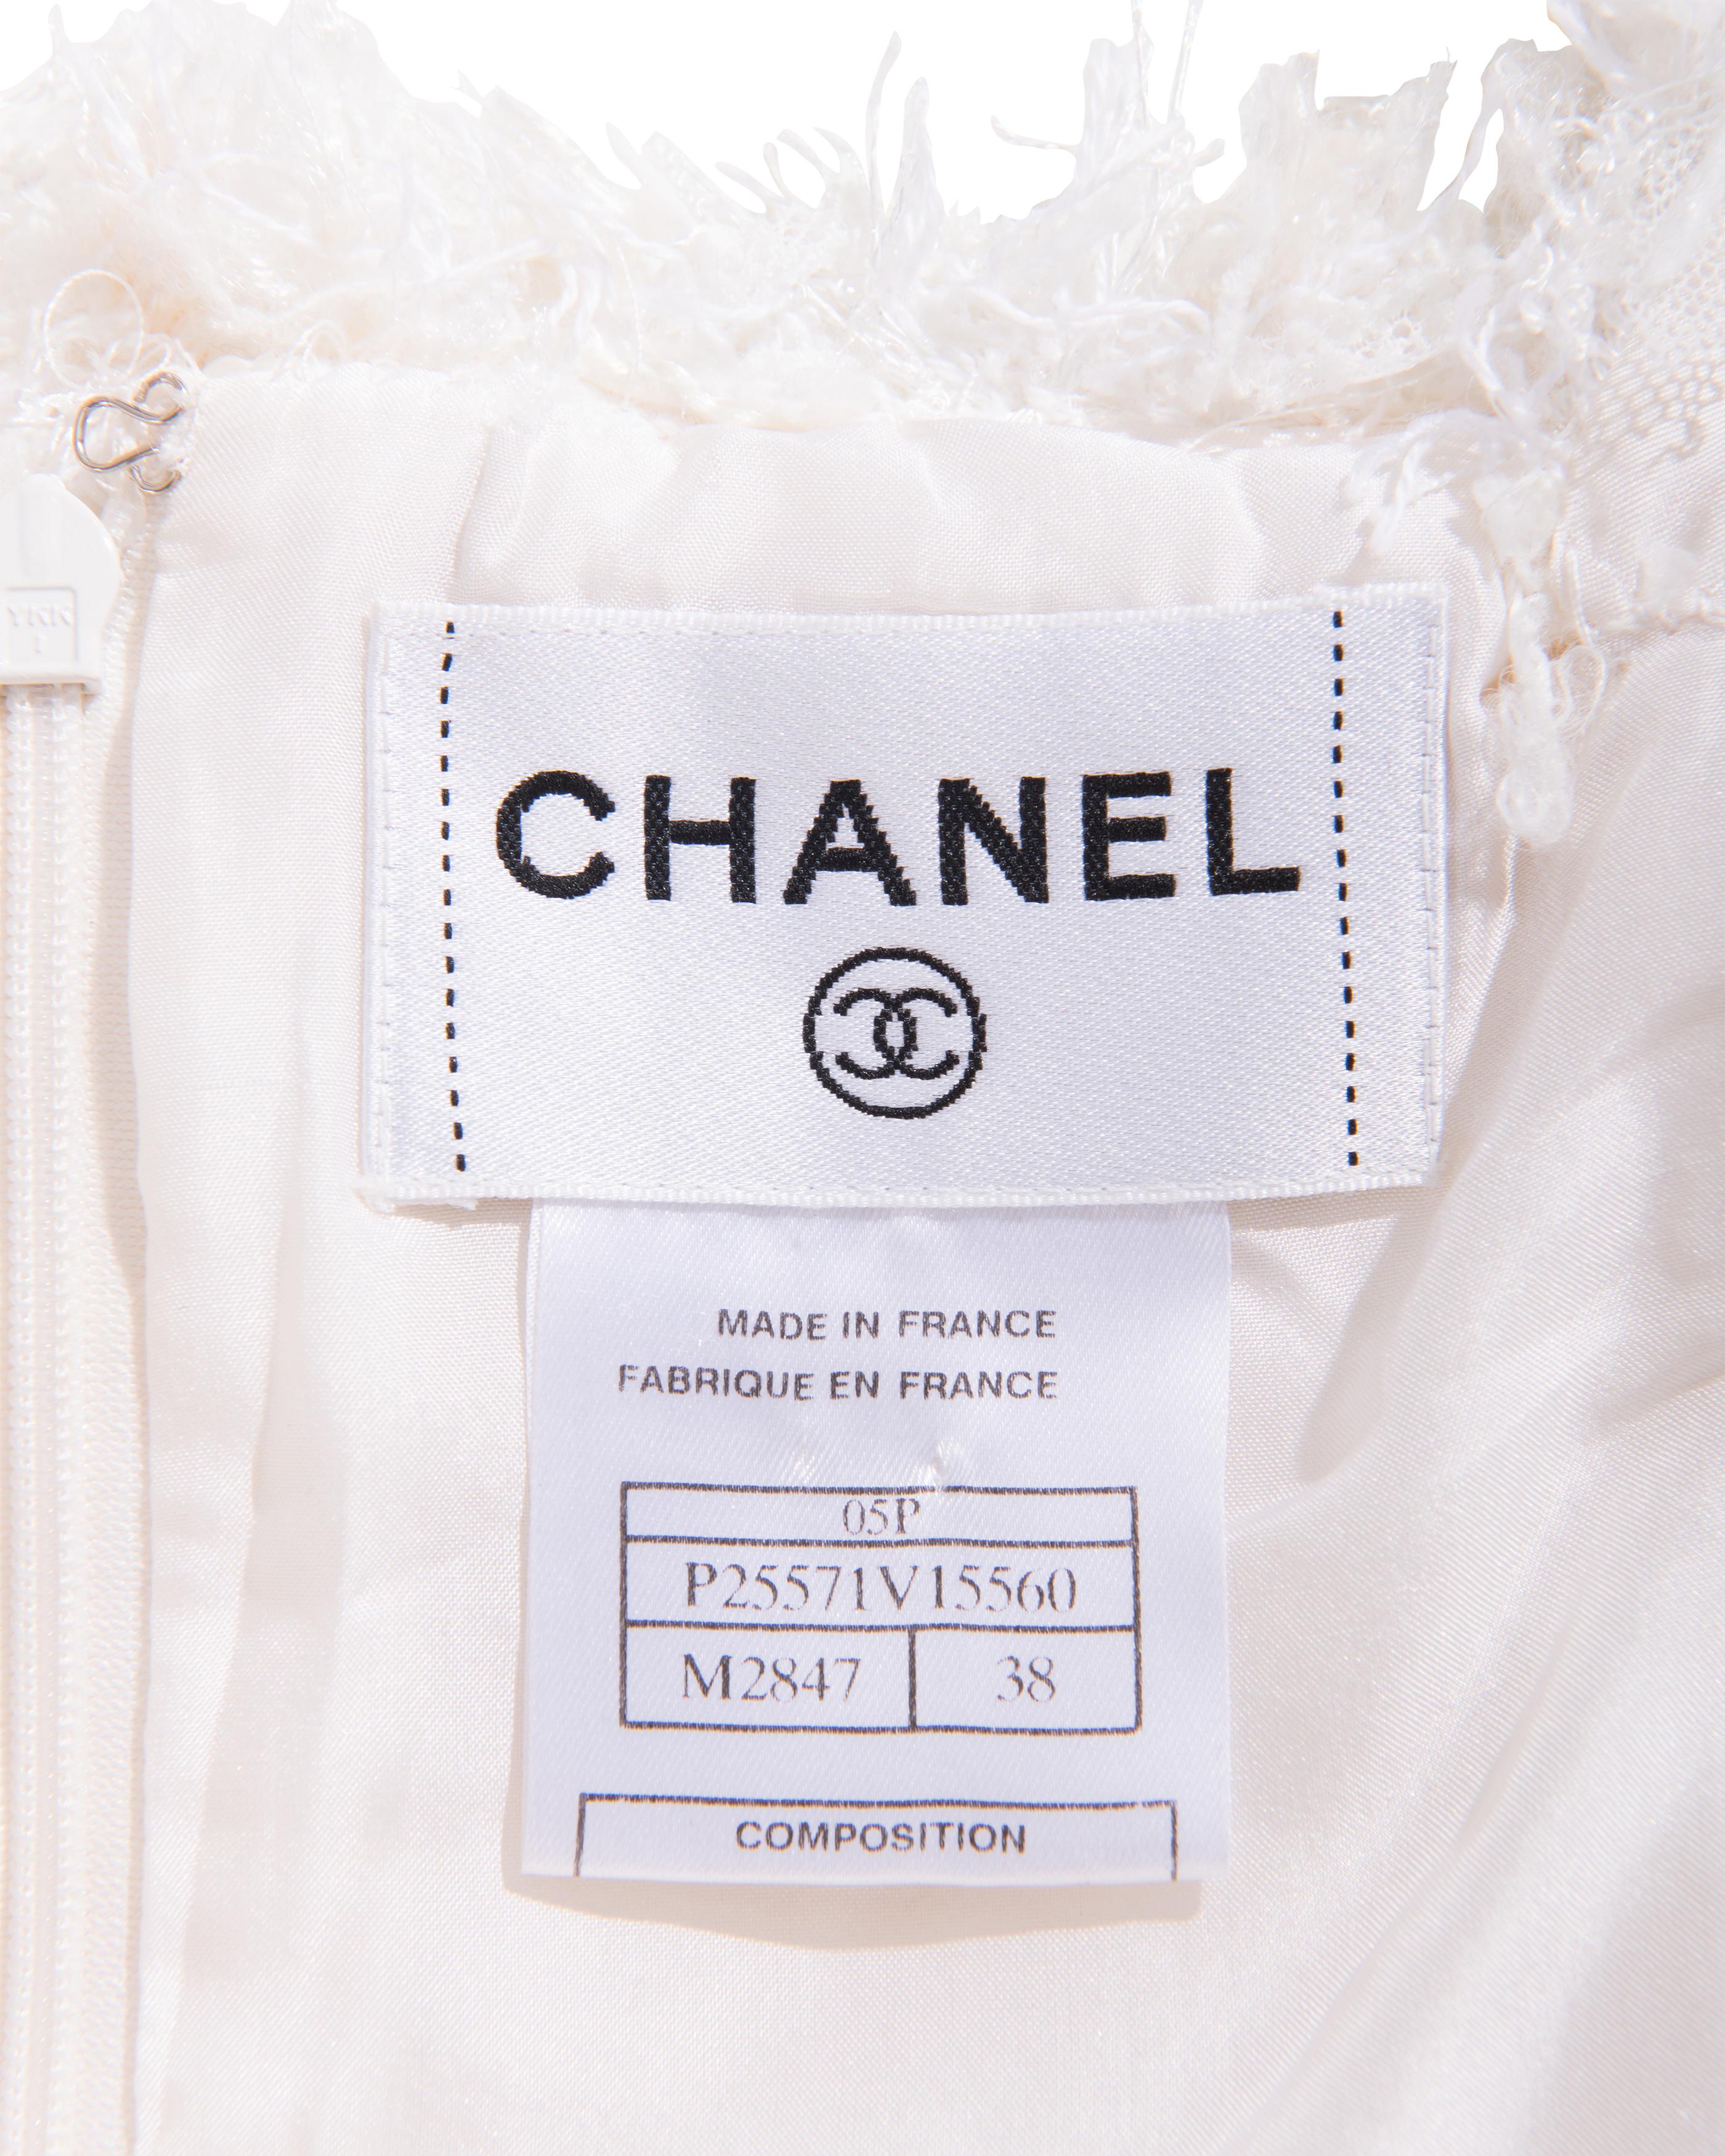 S/S 2005 Chanel by Karl Lagerfeld Metallic White Tweed Above-Knee Dress For Sale 5